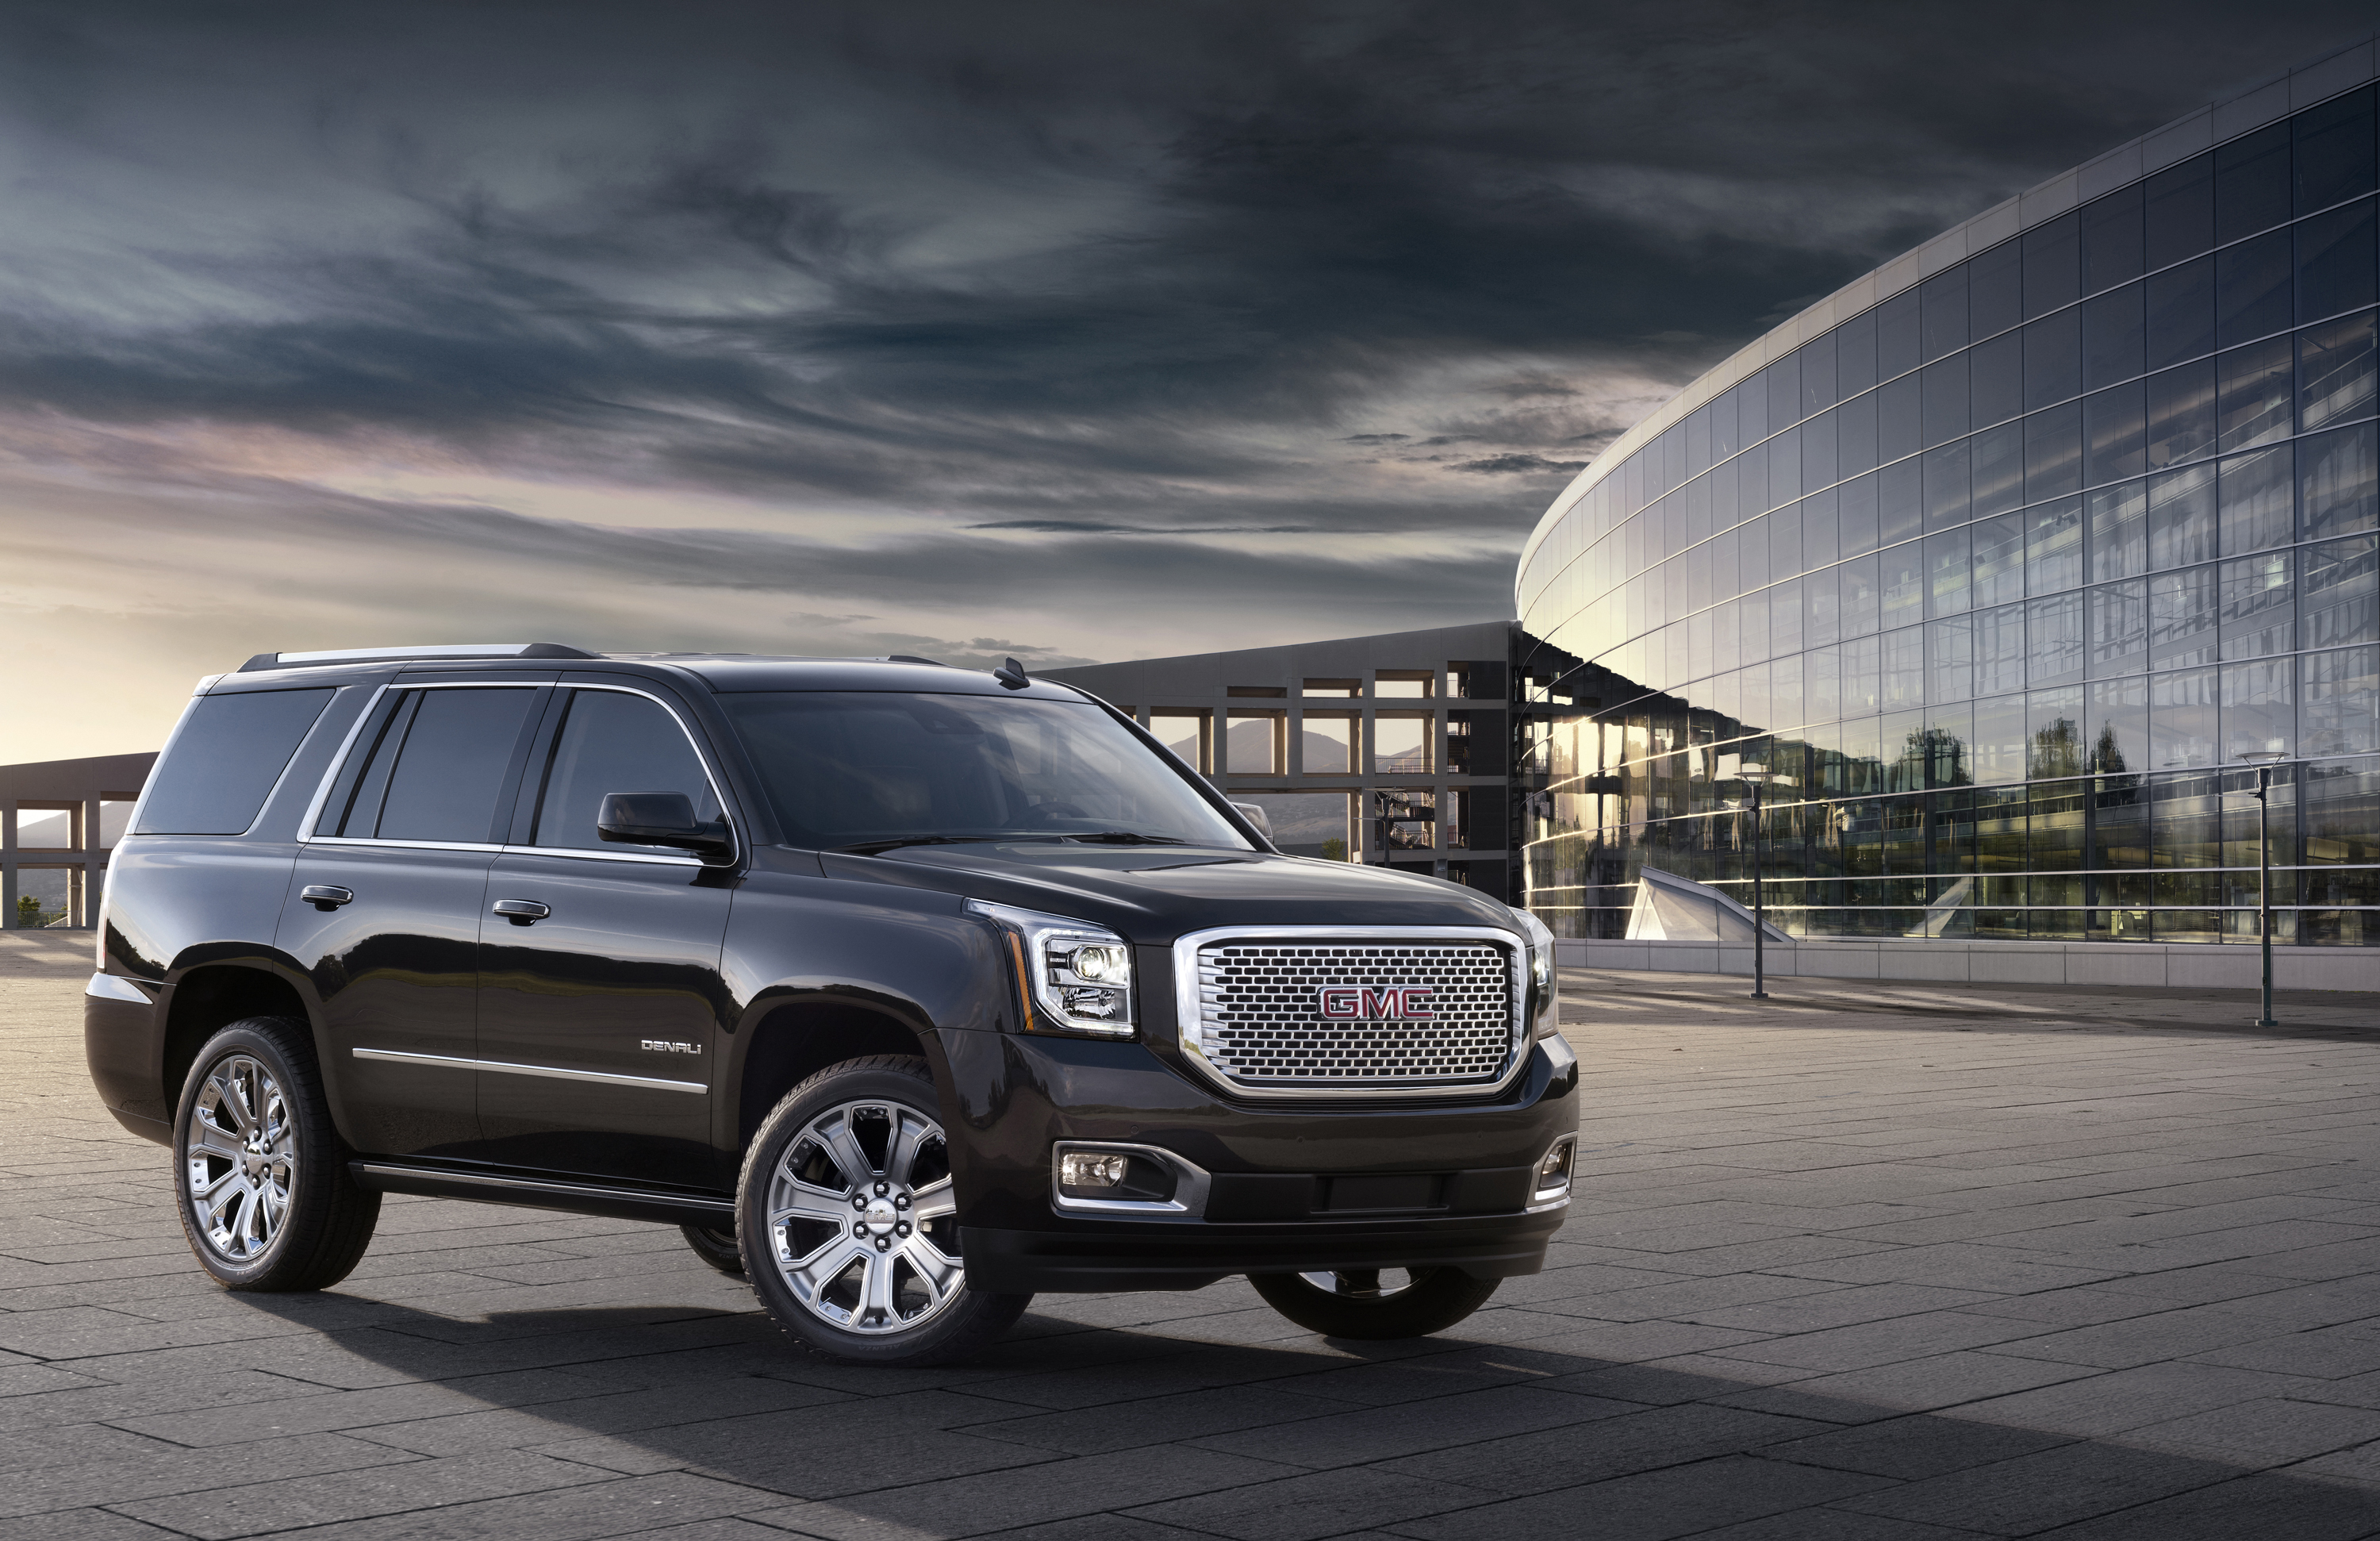 2016 GMC Yukon Named Best Large SUV for Families